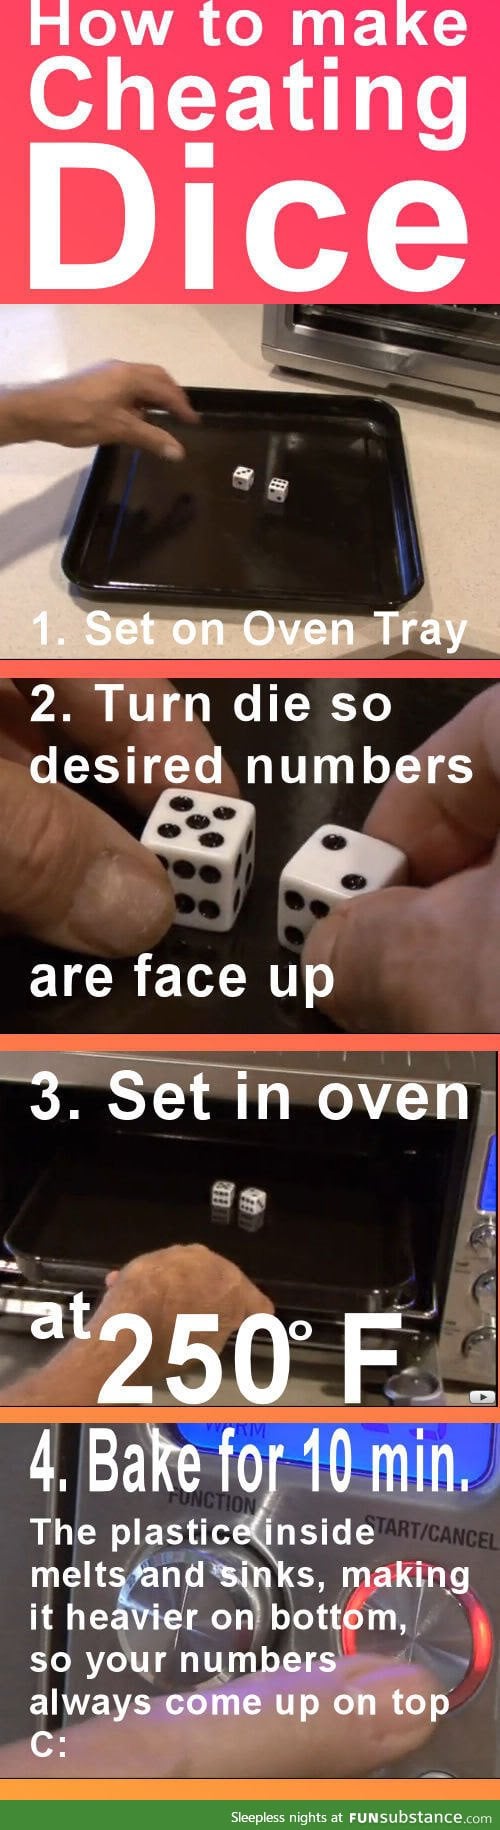 How to make a cheating dice